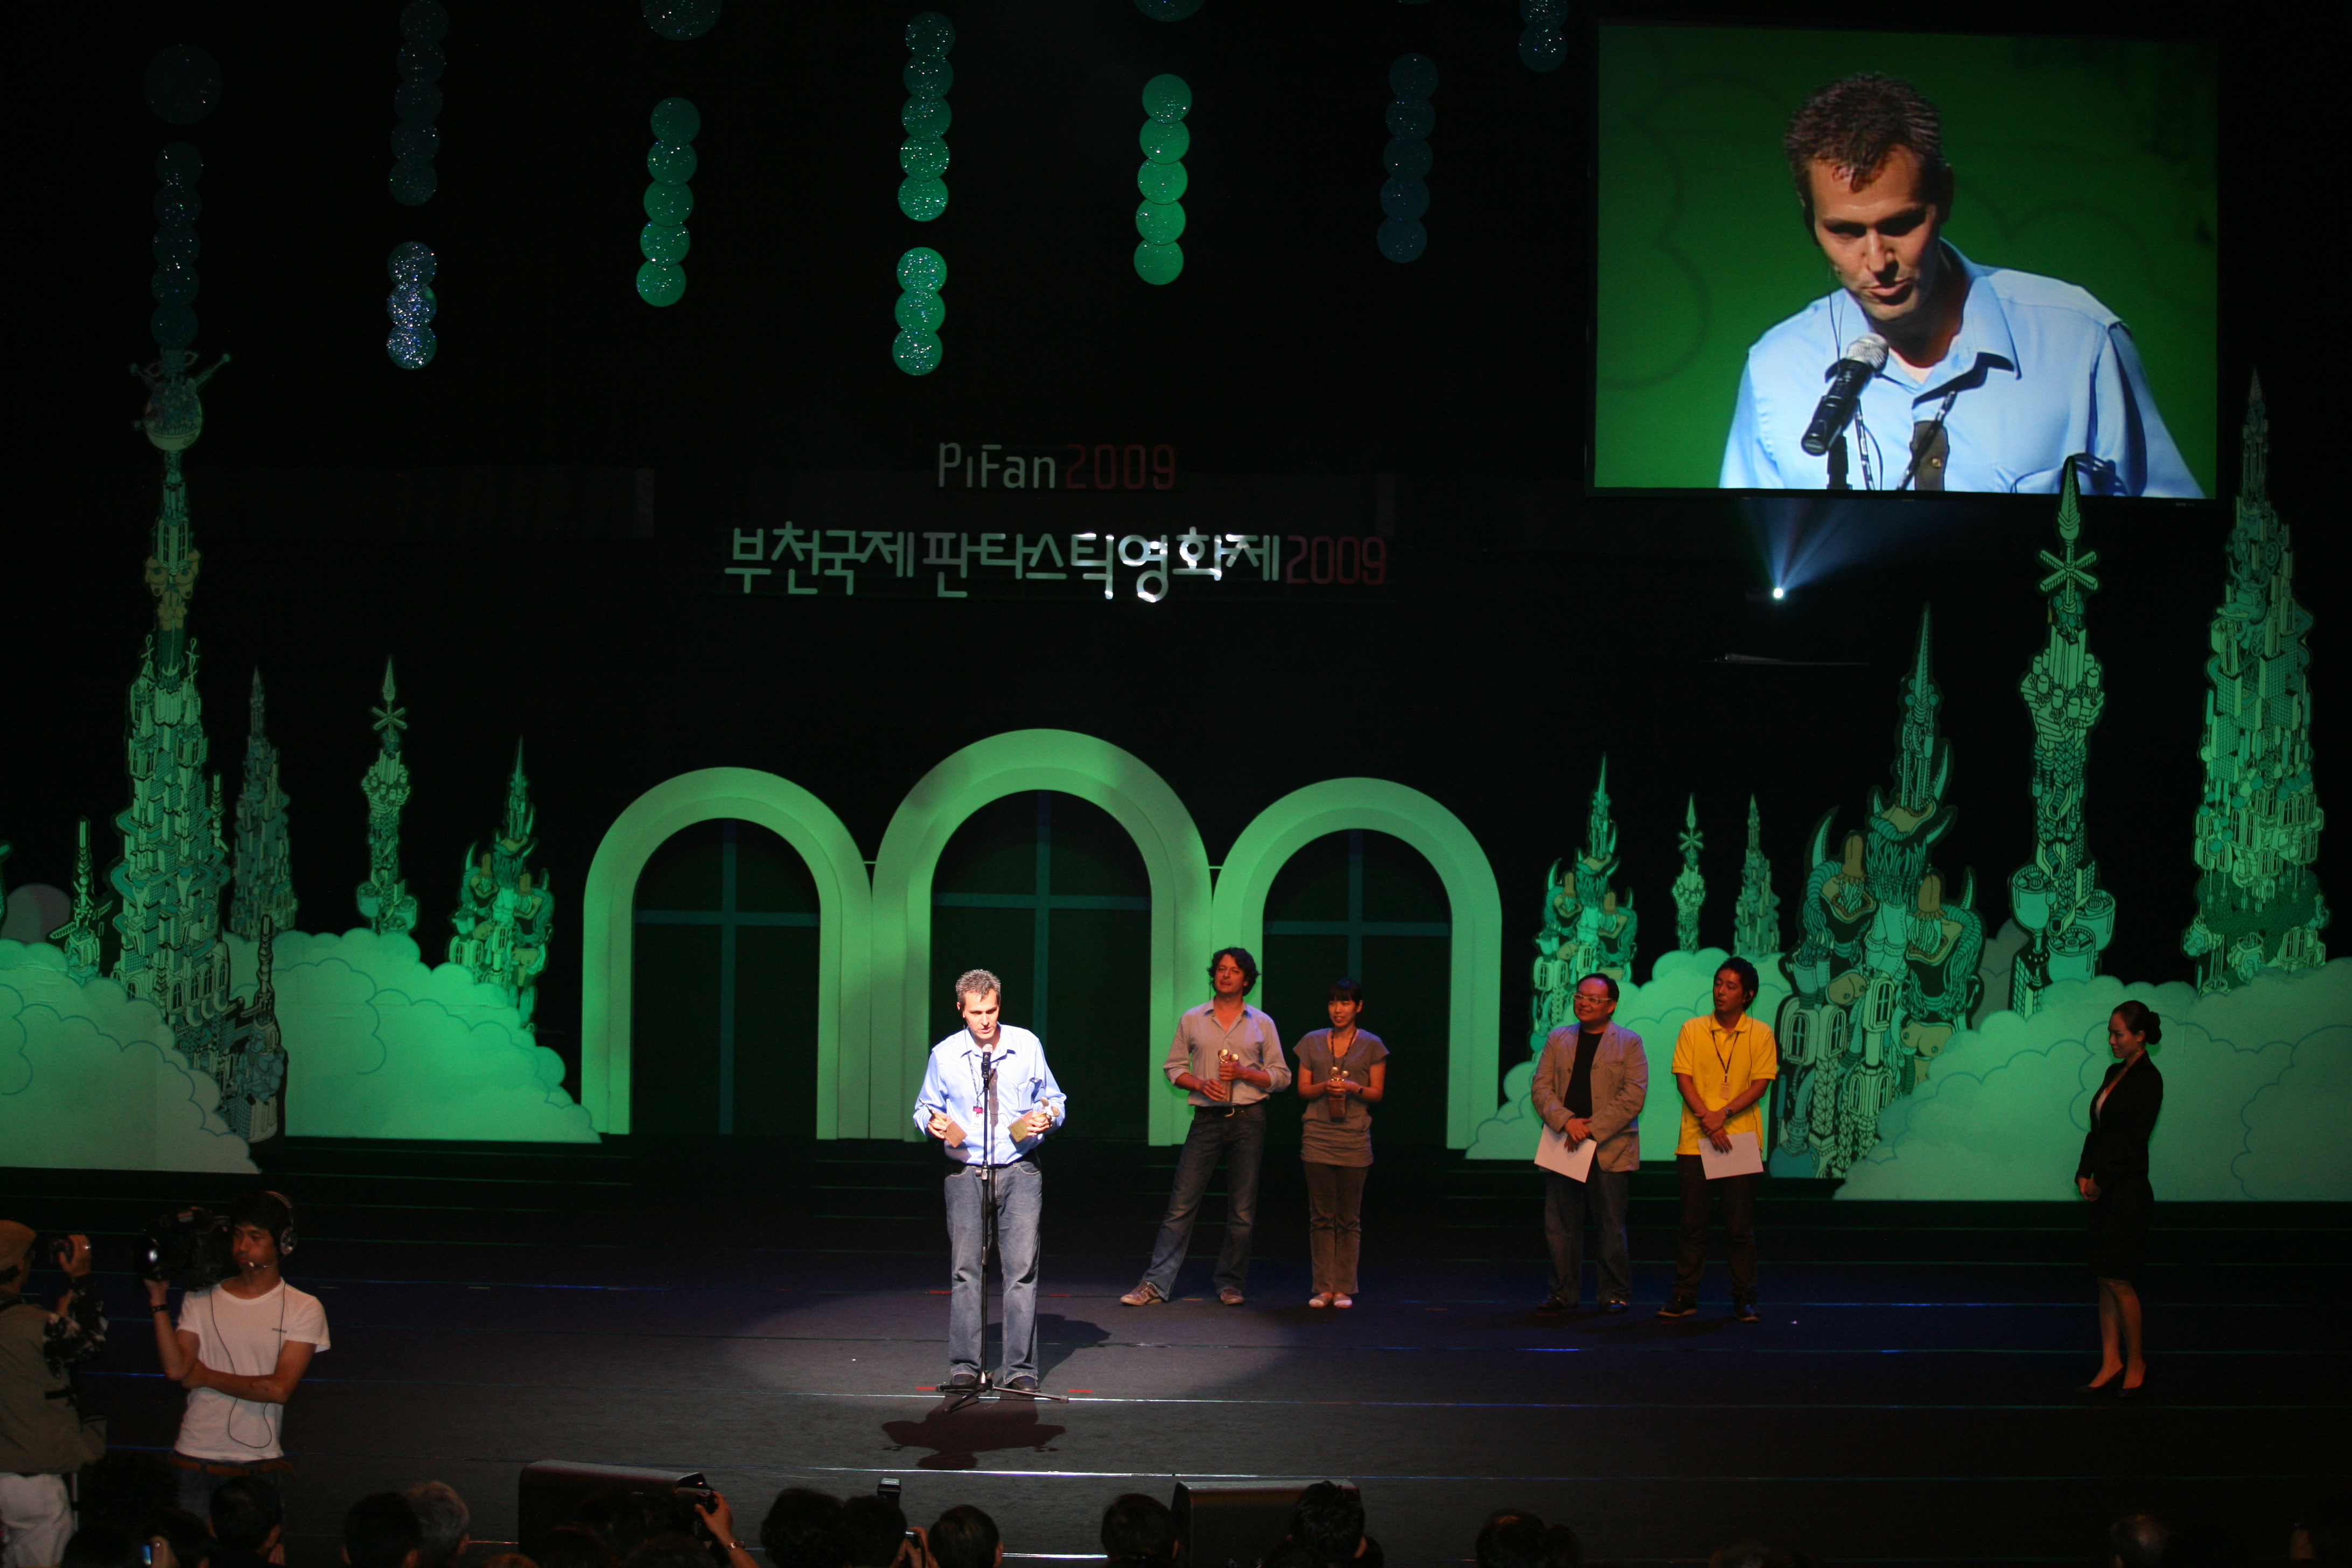 Richard Gale accepts the Jury Grand Prize for Best Short Film at PiFan, the Puchon International Fantastic Film Festival in Bucheon, South Korea.